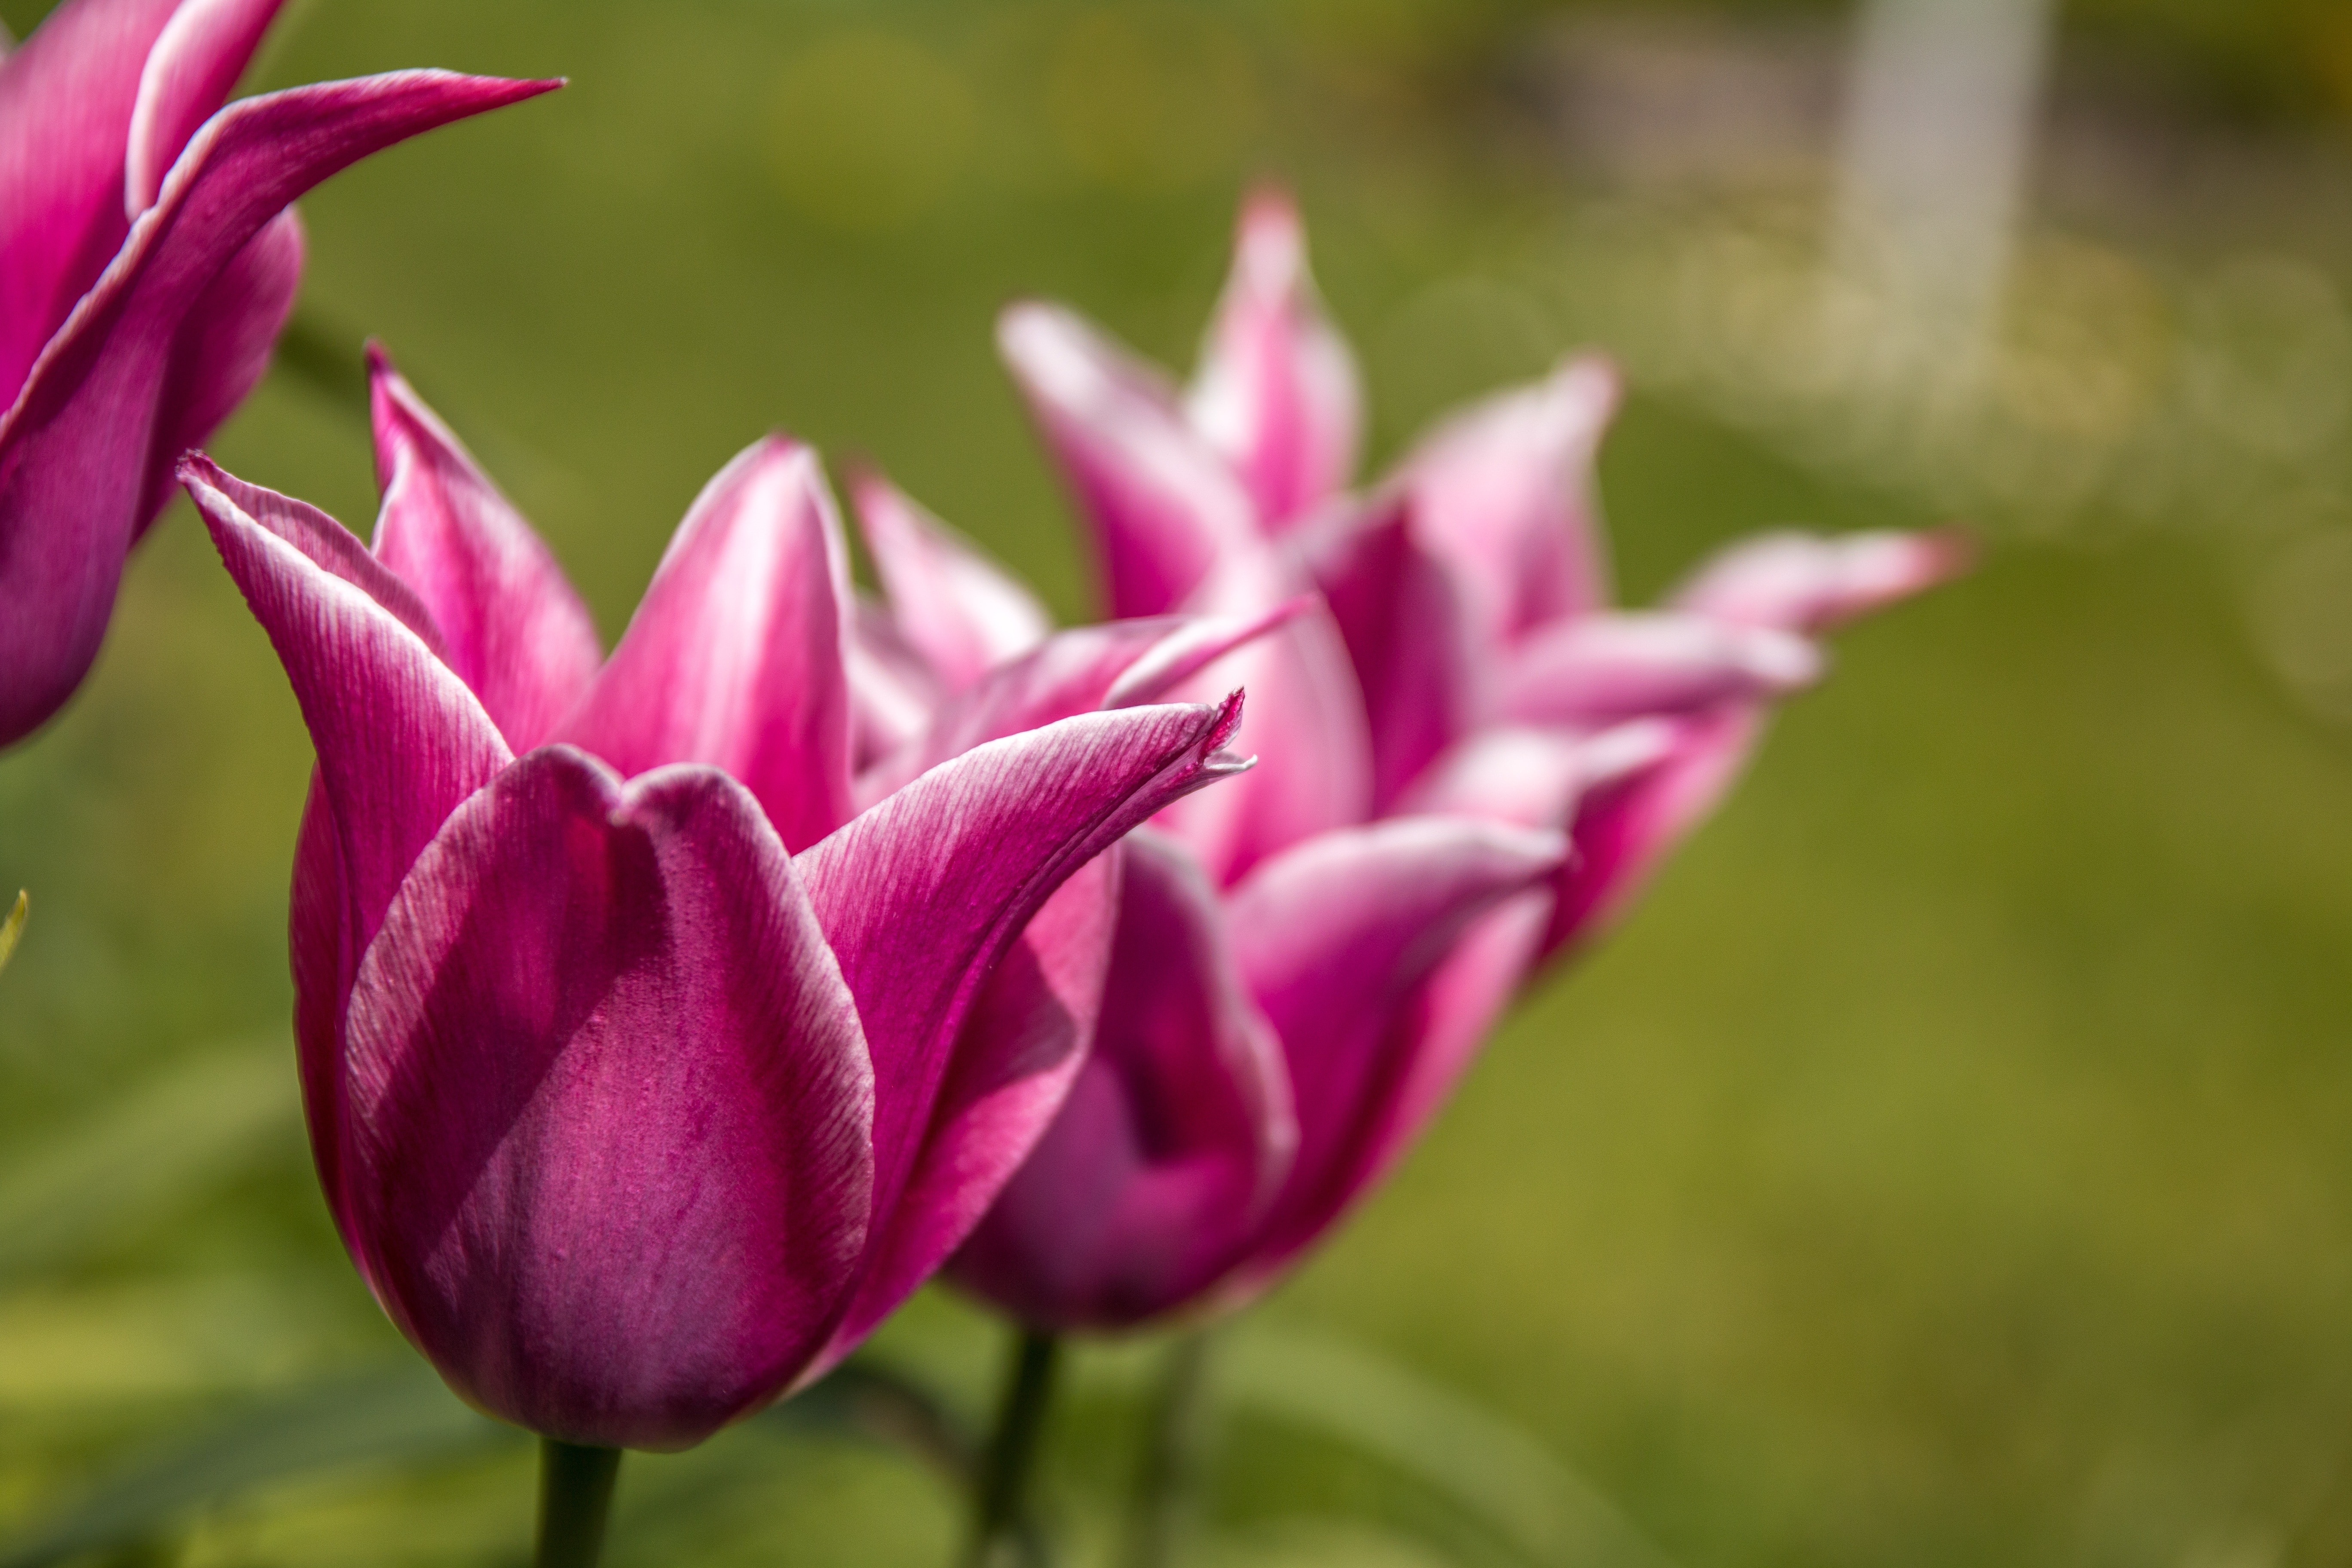 Tulips, Bloom, Nature, Blossom, Macro, pink color, flower